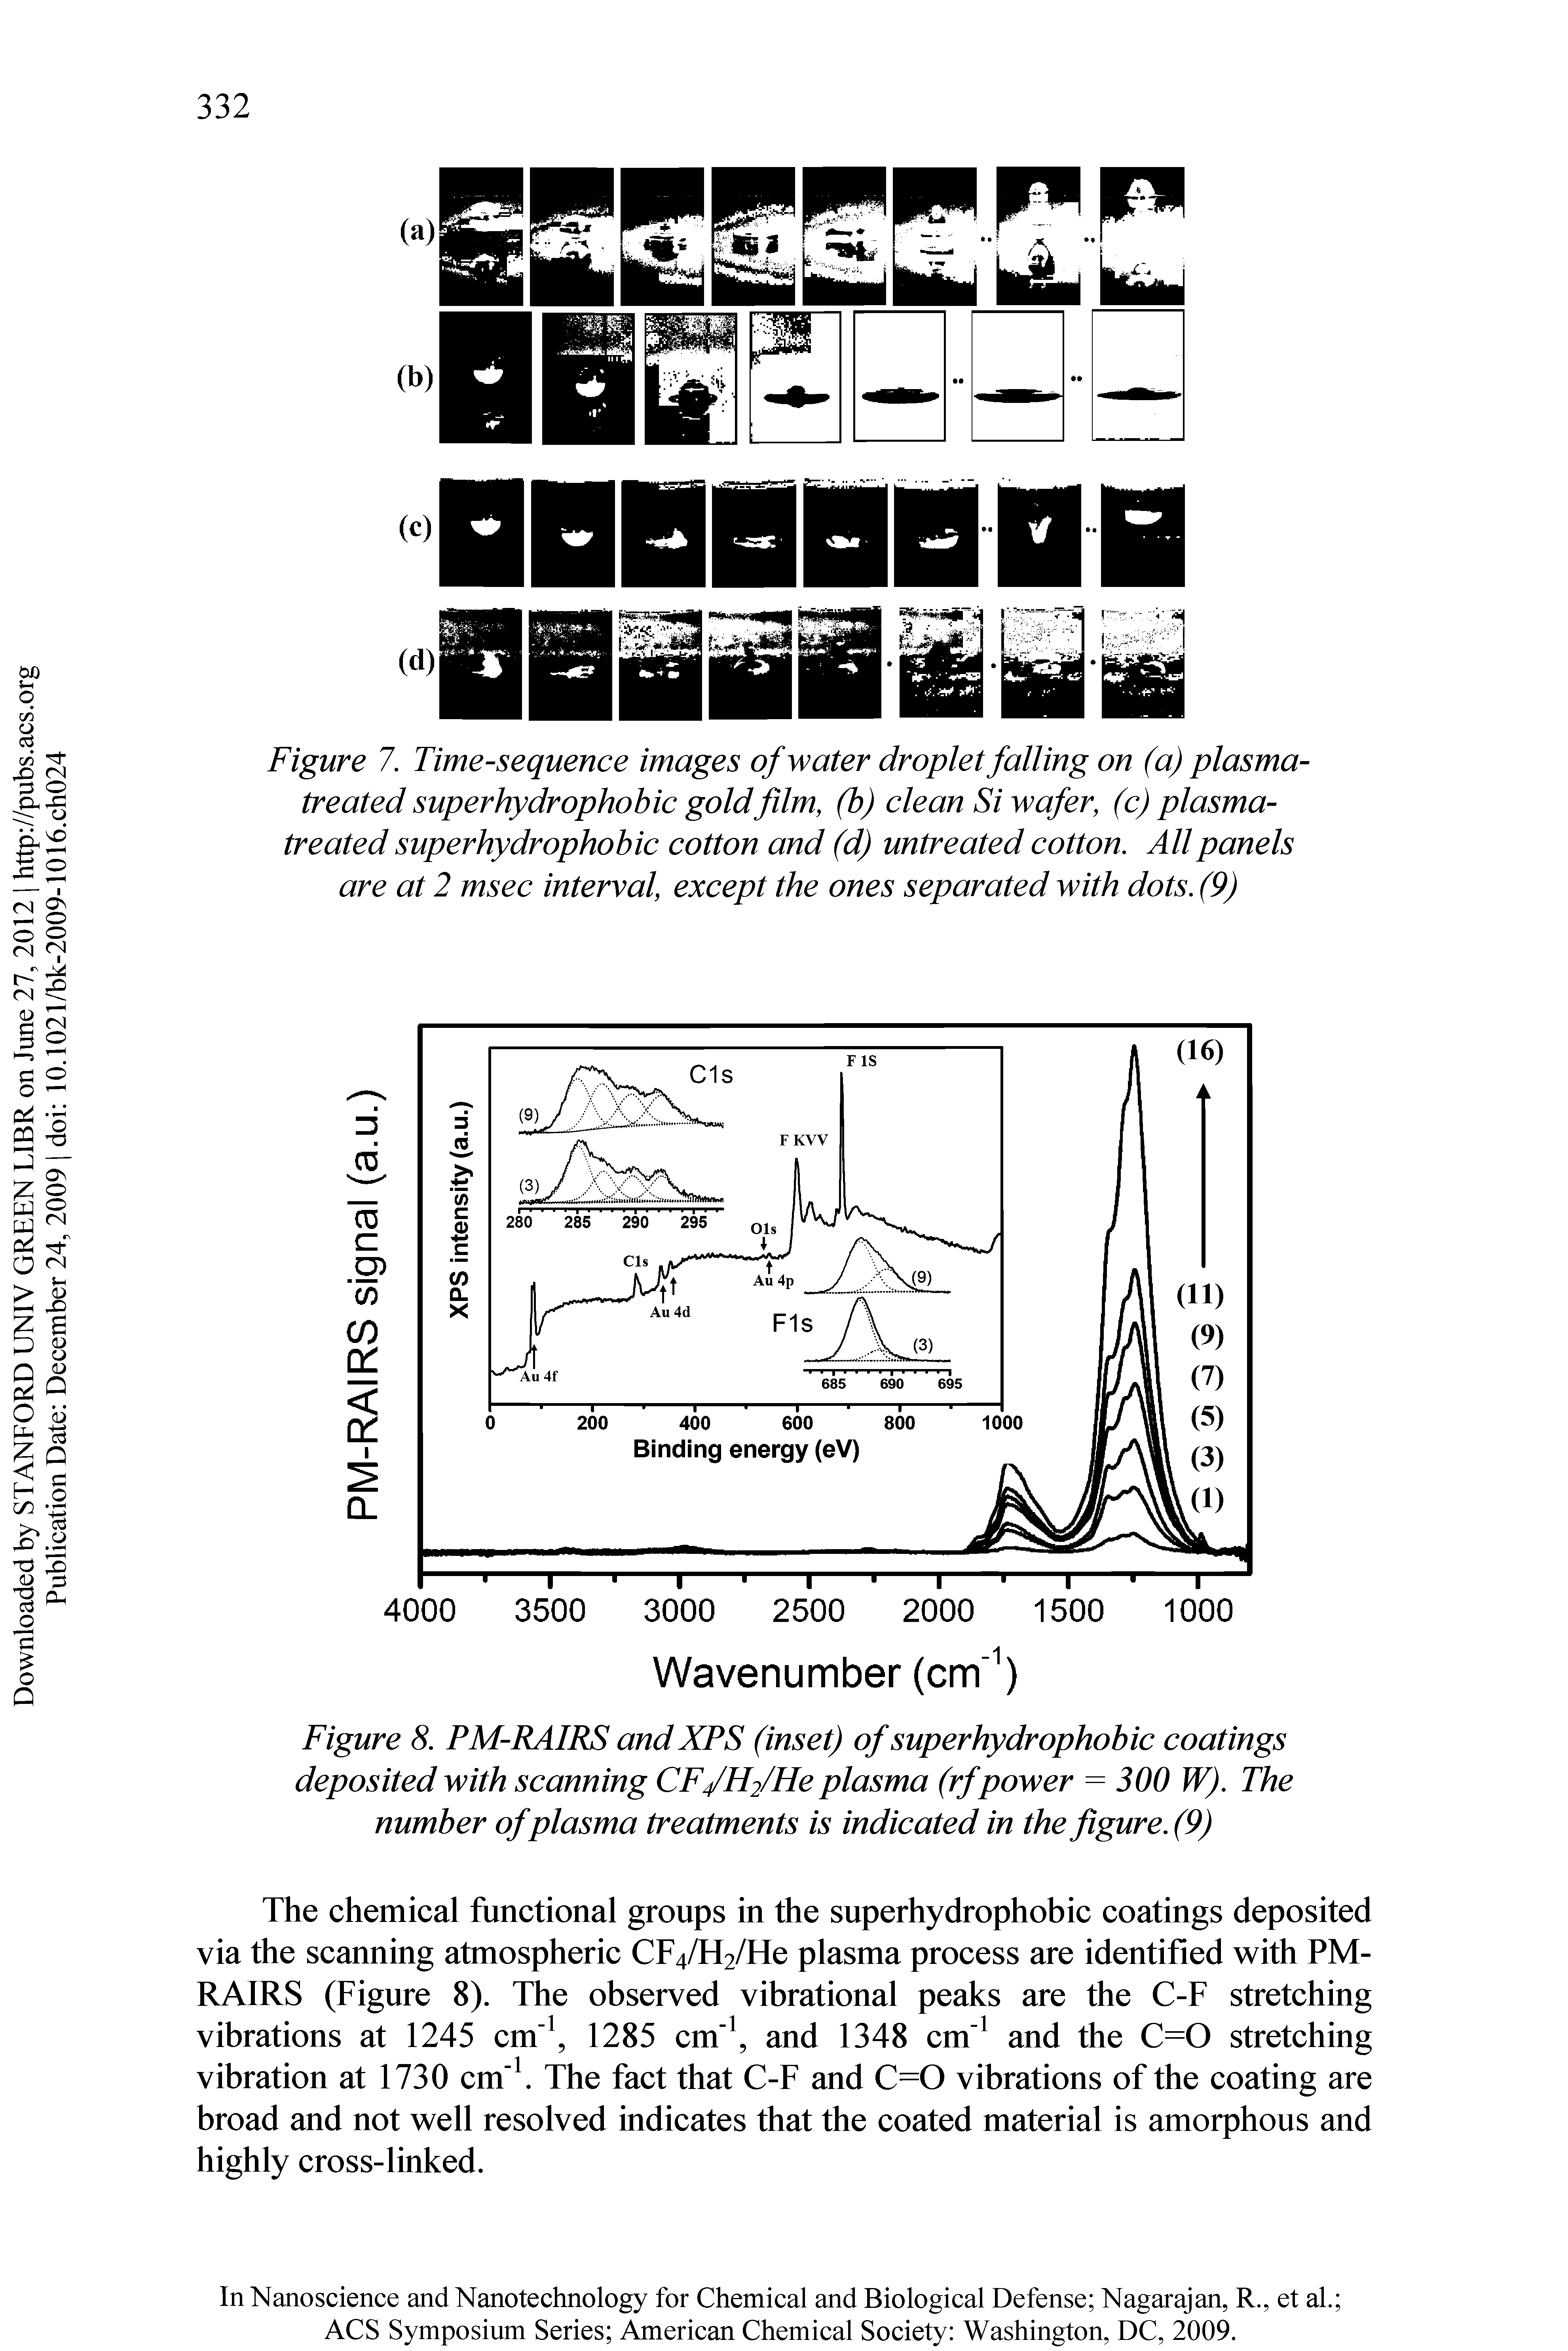 Figure 8. PM-RAIRS andXPS (inset) of superhydrophobic coatings deposited with scanning CF4/H2/He plasma (rf power = 300 W). The number of plasma treatments is indicated in the figure. (9)...